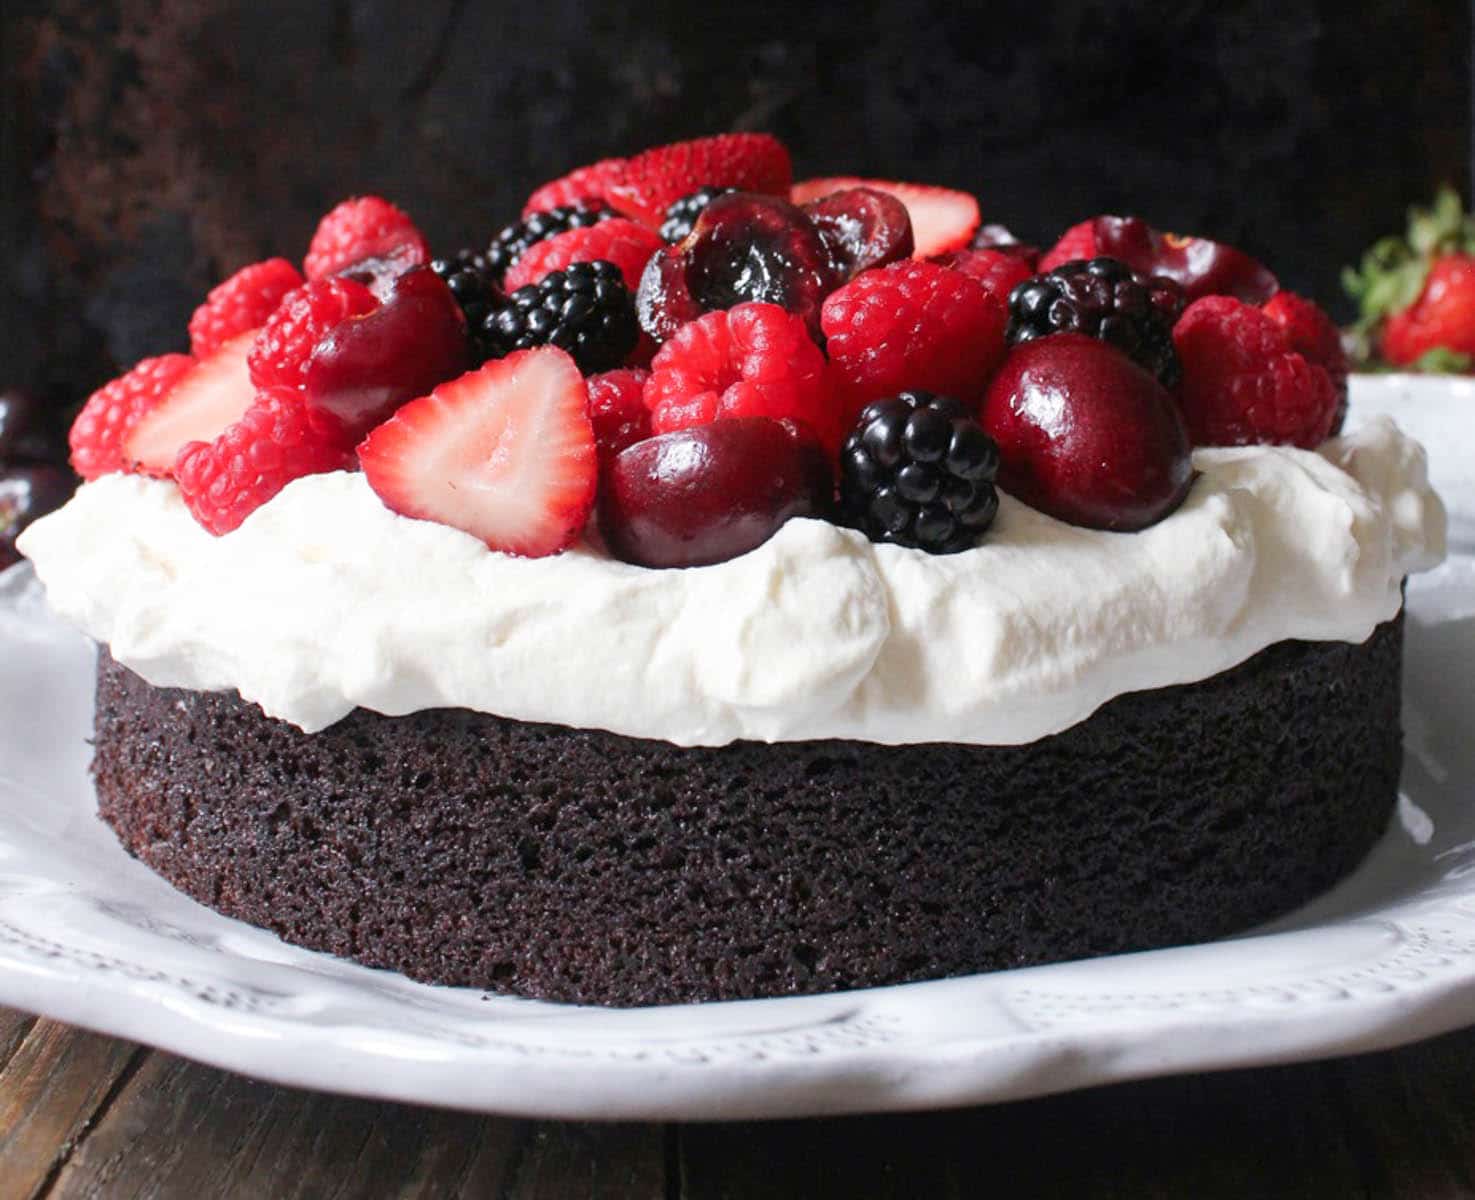 Foolproof-Chocolate-Cake-With-Whipped-Cream-and-Berries-7